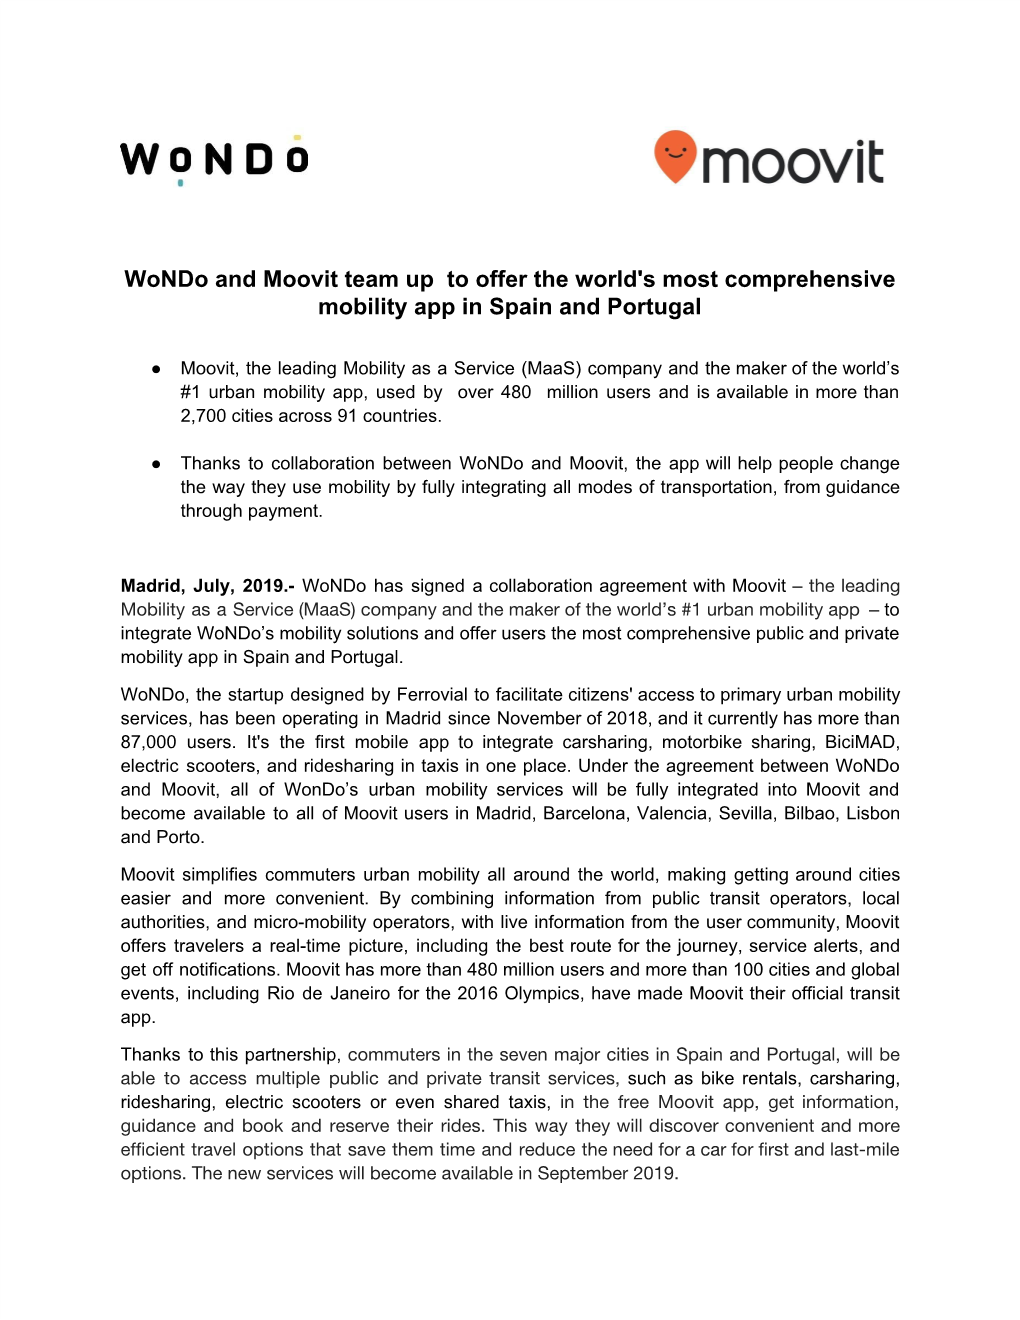 Wondo and Moovit Team up to Offer the World's Most Comprehensive Mobility App in Spain and Portugal